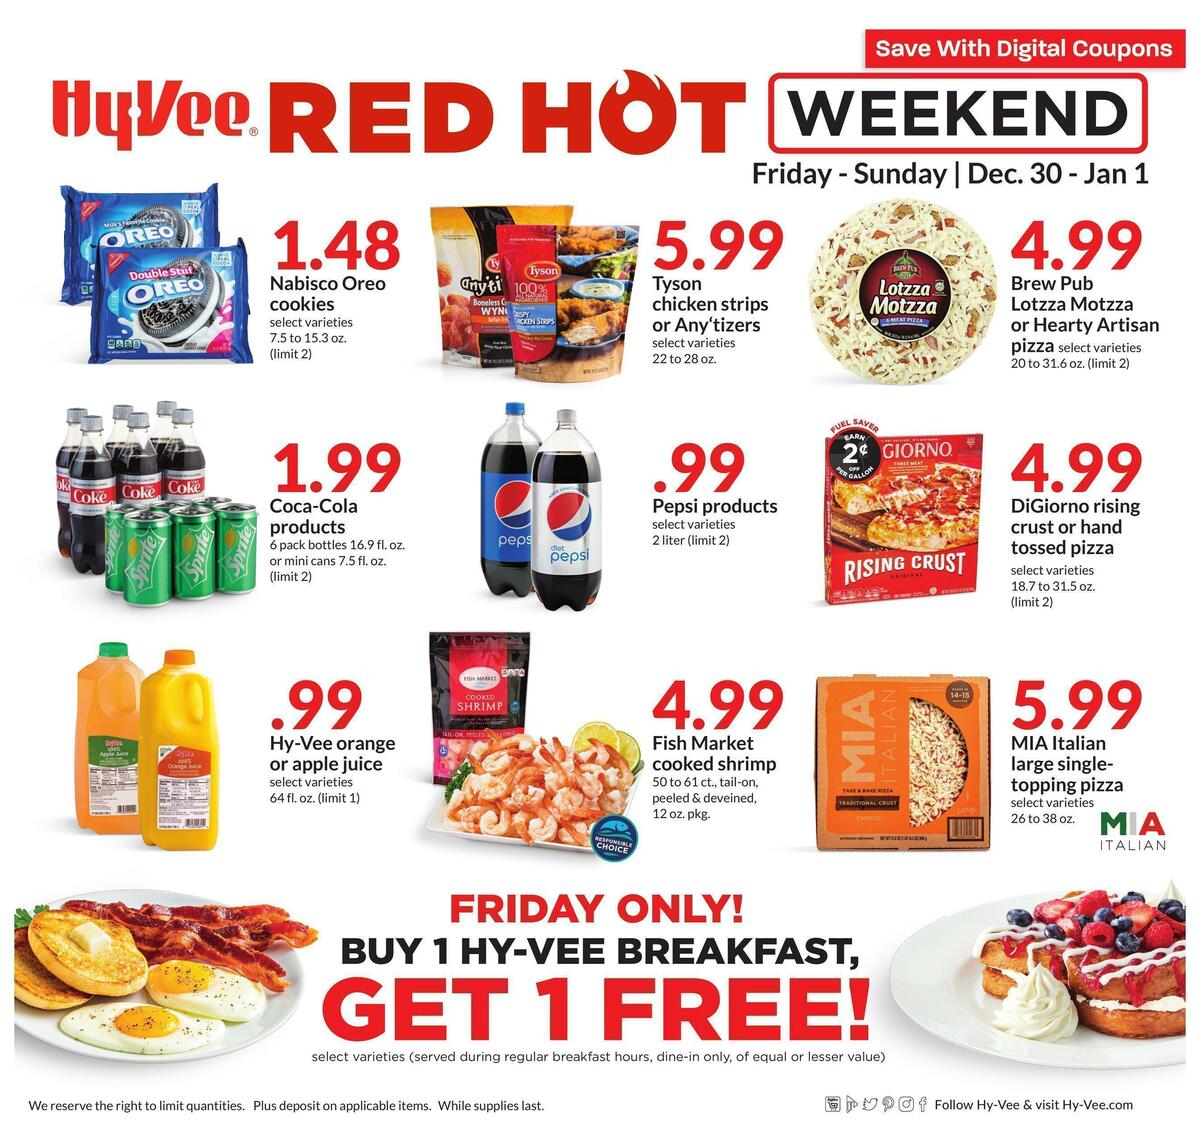 HyVee Red Hot Weekend Deals & Ads from December 30